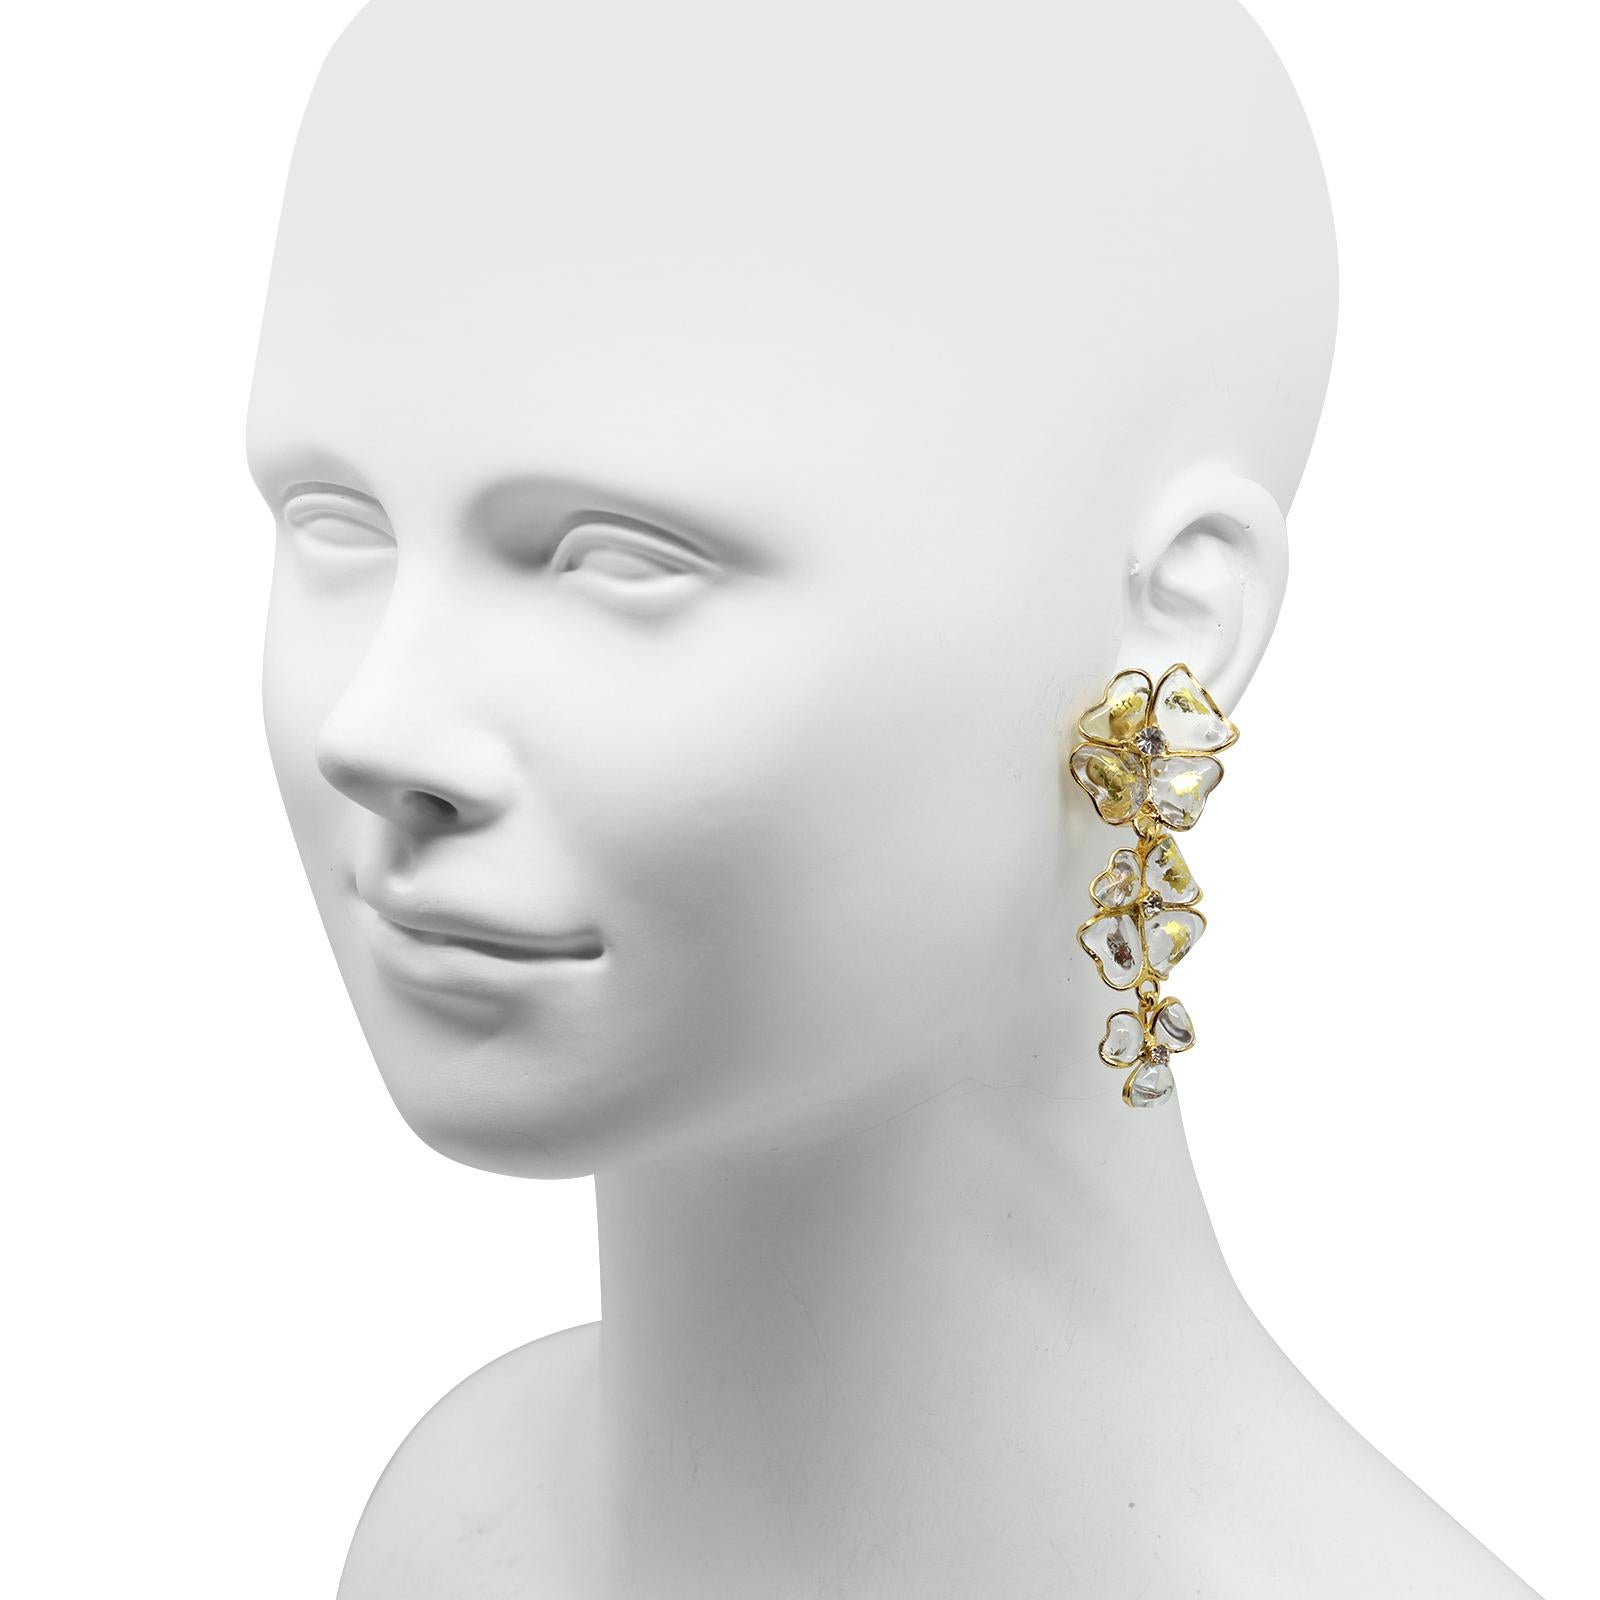 Vintage Gripoix Translucent Earrings with Pieces Of Gold. Dangling Earrings With Pieces of Gold and Stones. Long Necklace/Sautoir on Site to Match. So Gorgeous!   This matches the necklace and sometimes when a set is matched it is magical and this